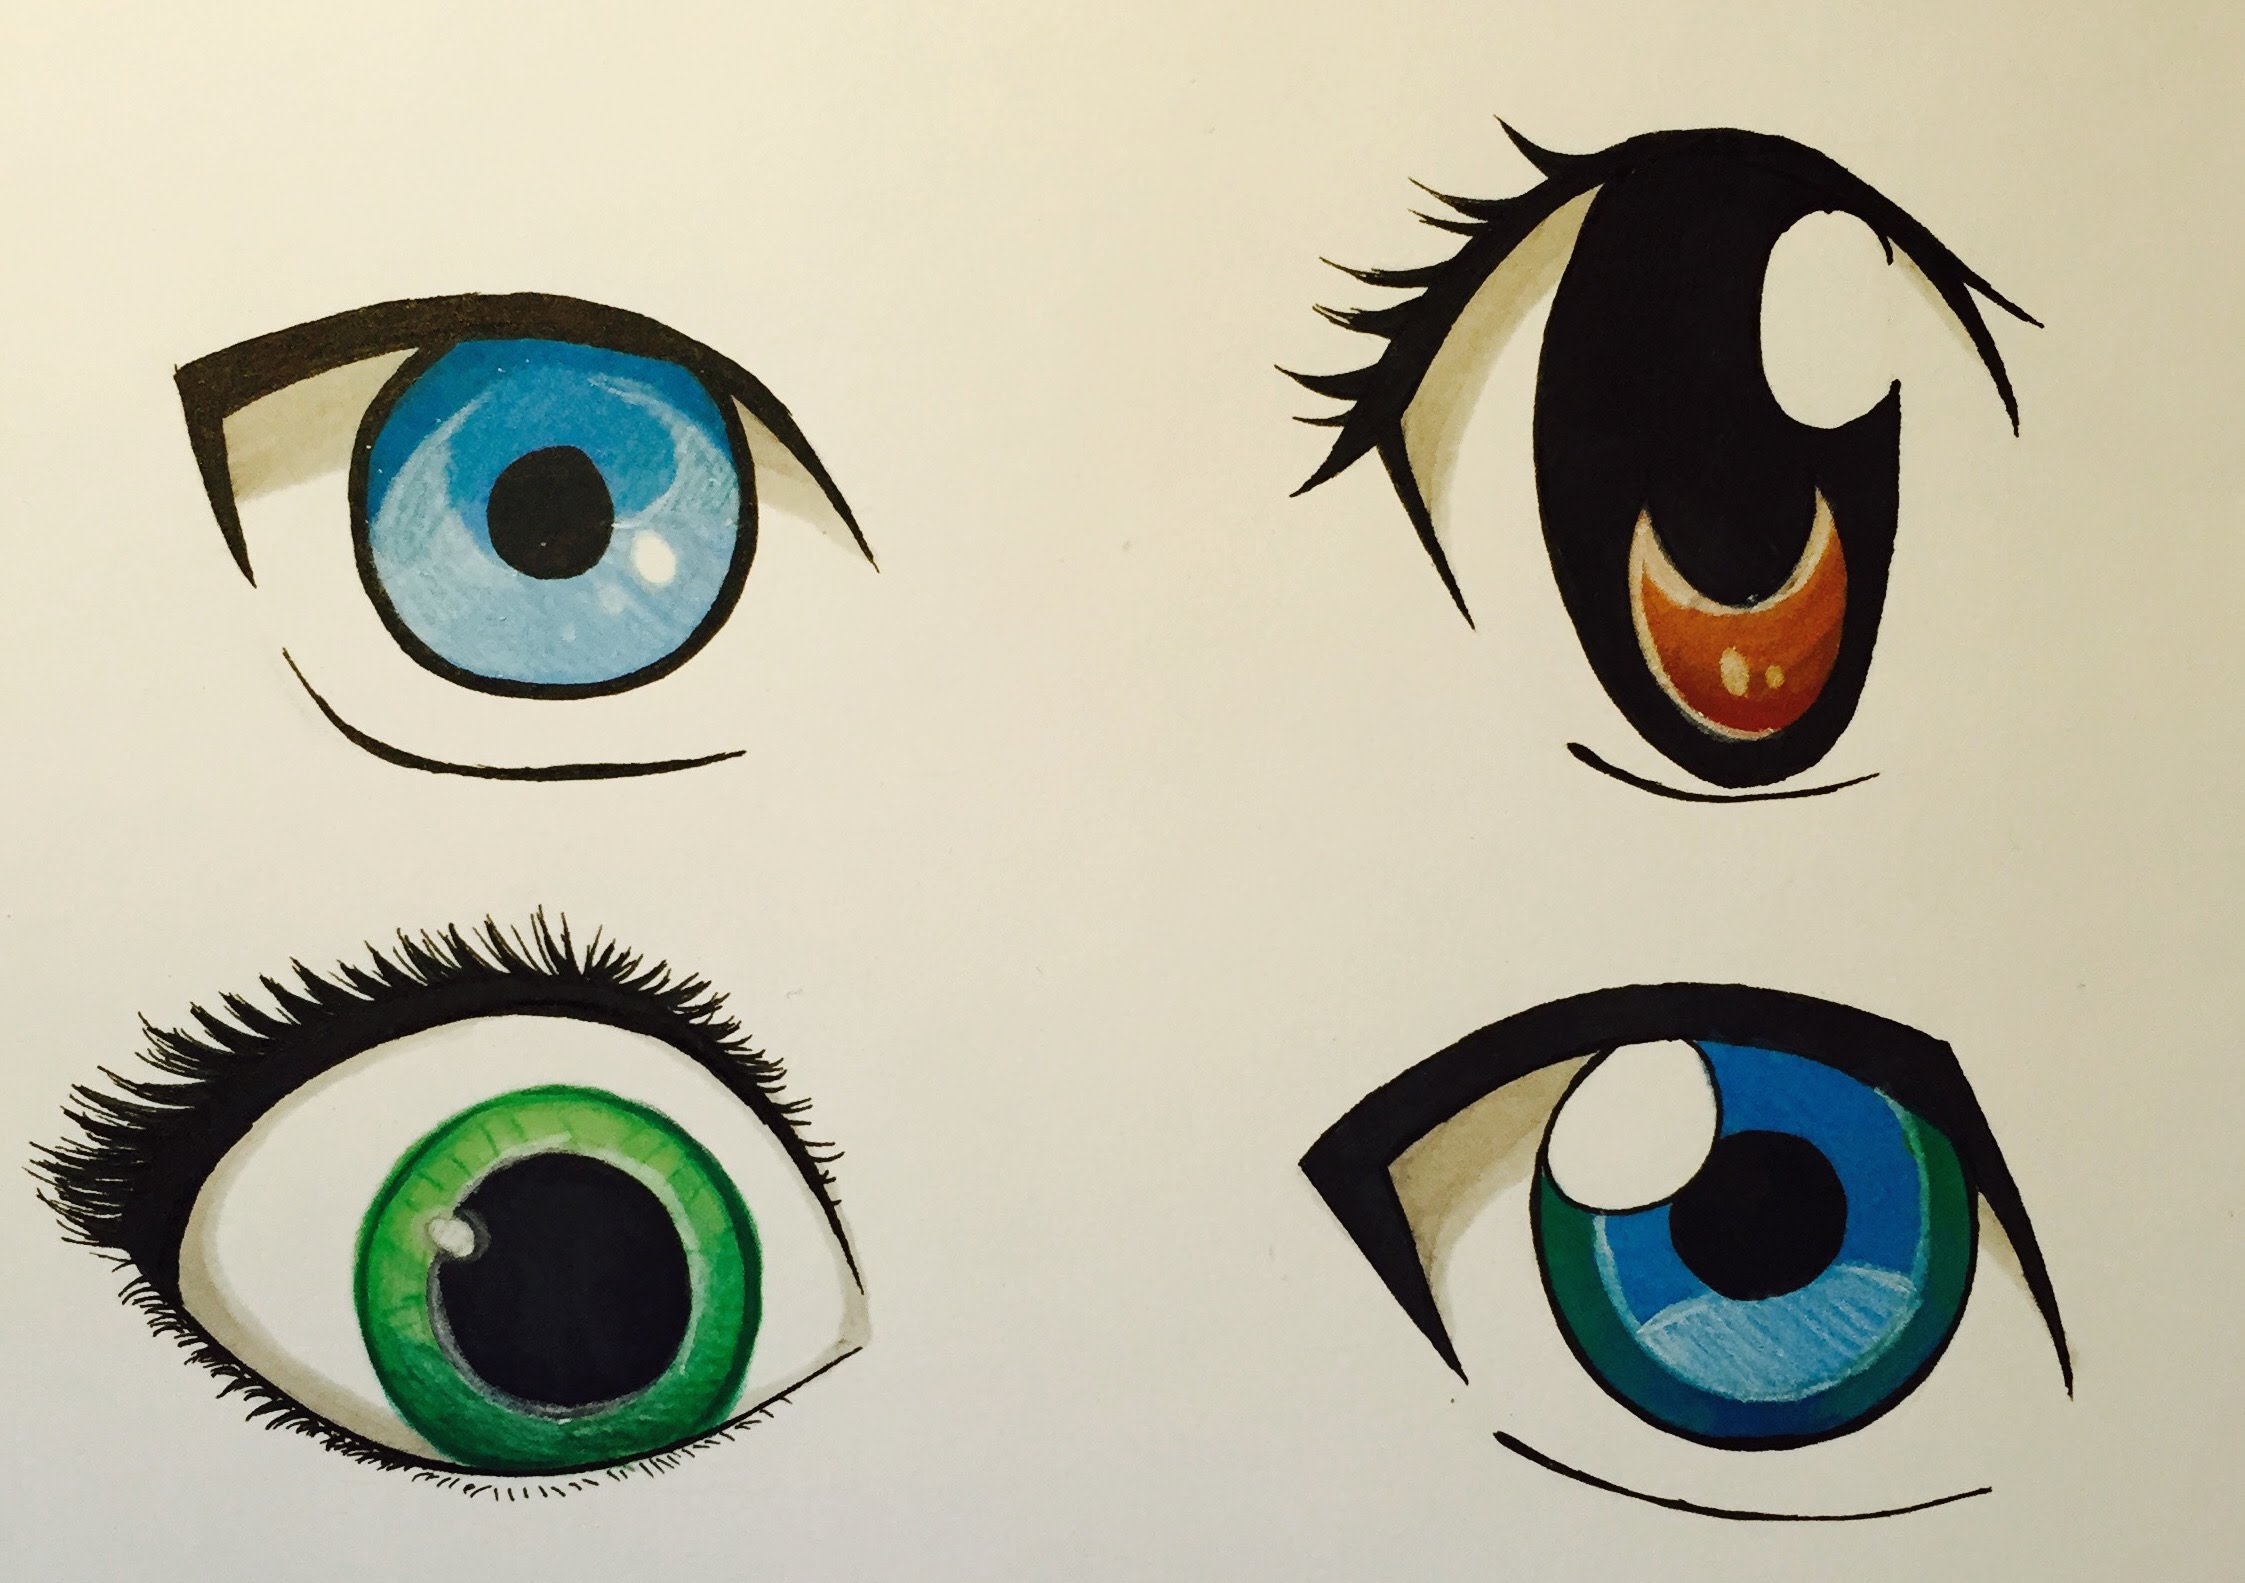 Easy Anime Eyes Drawings - How To Draw Simple Anime Eyes: 5 Steps (with ...